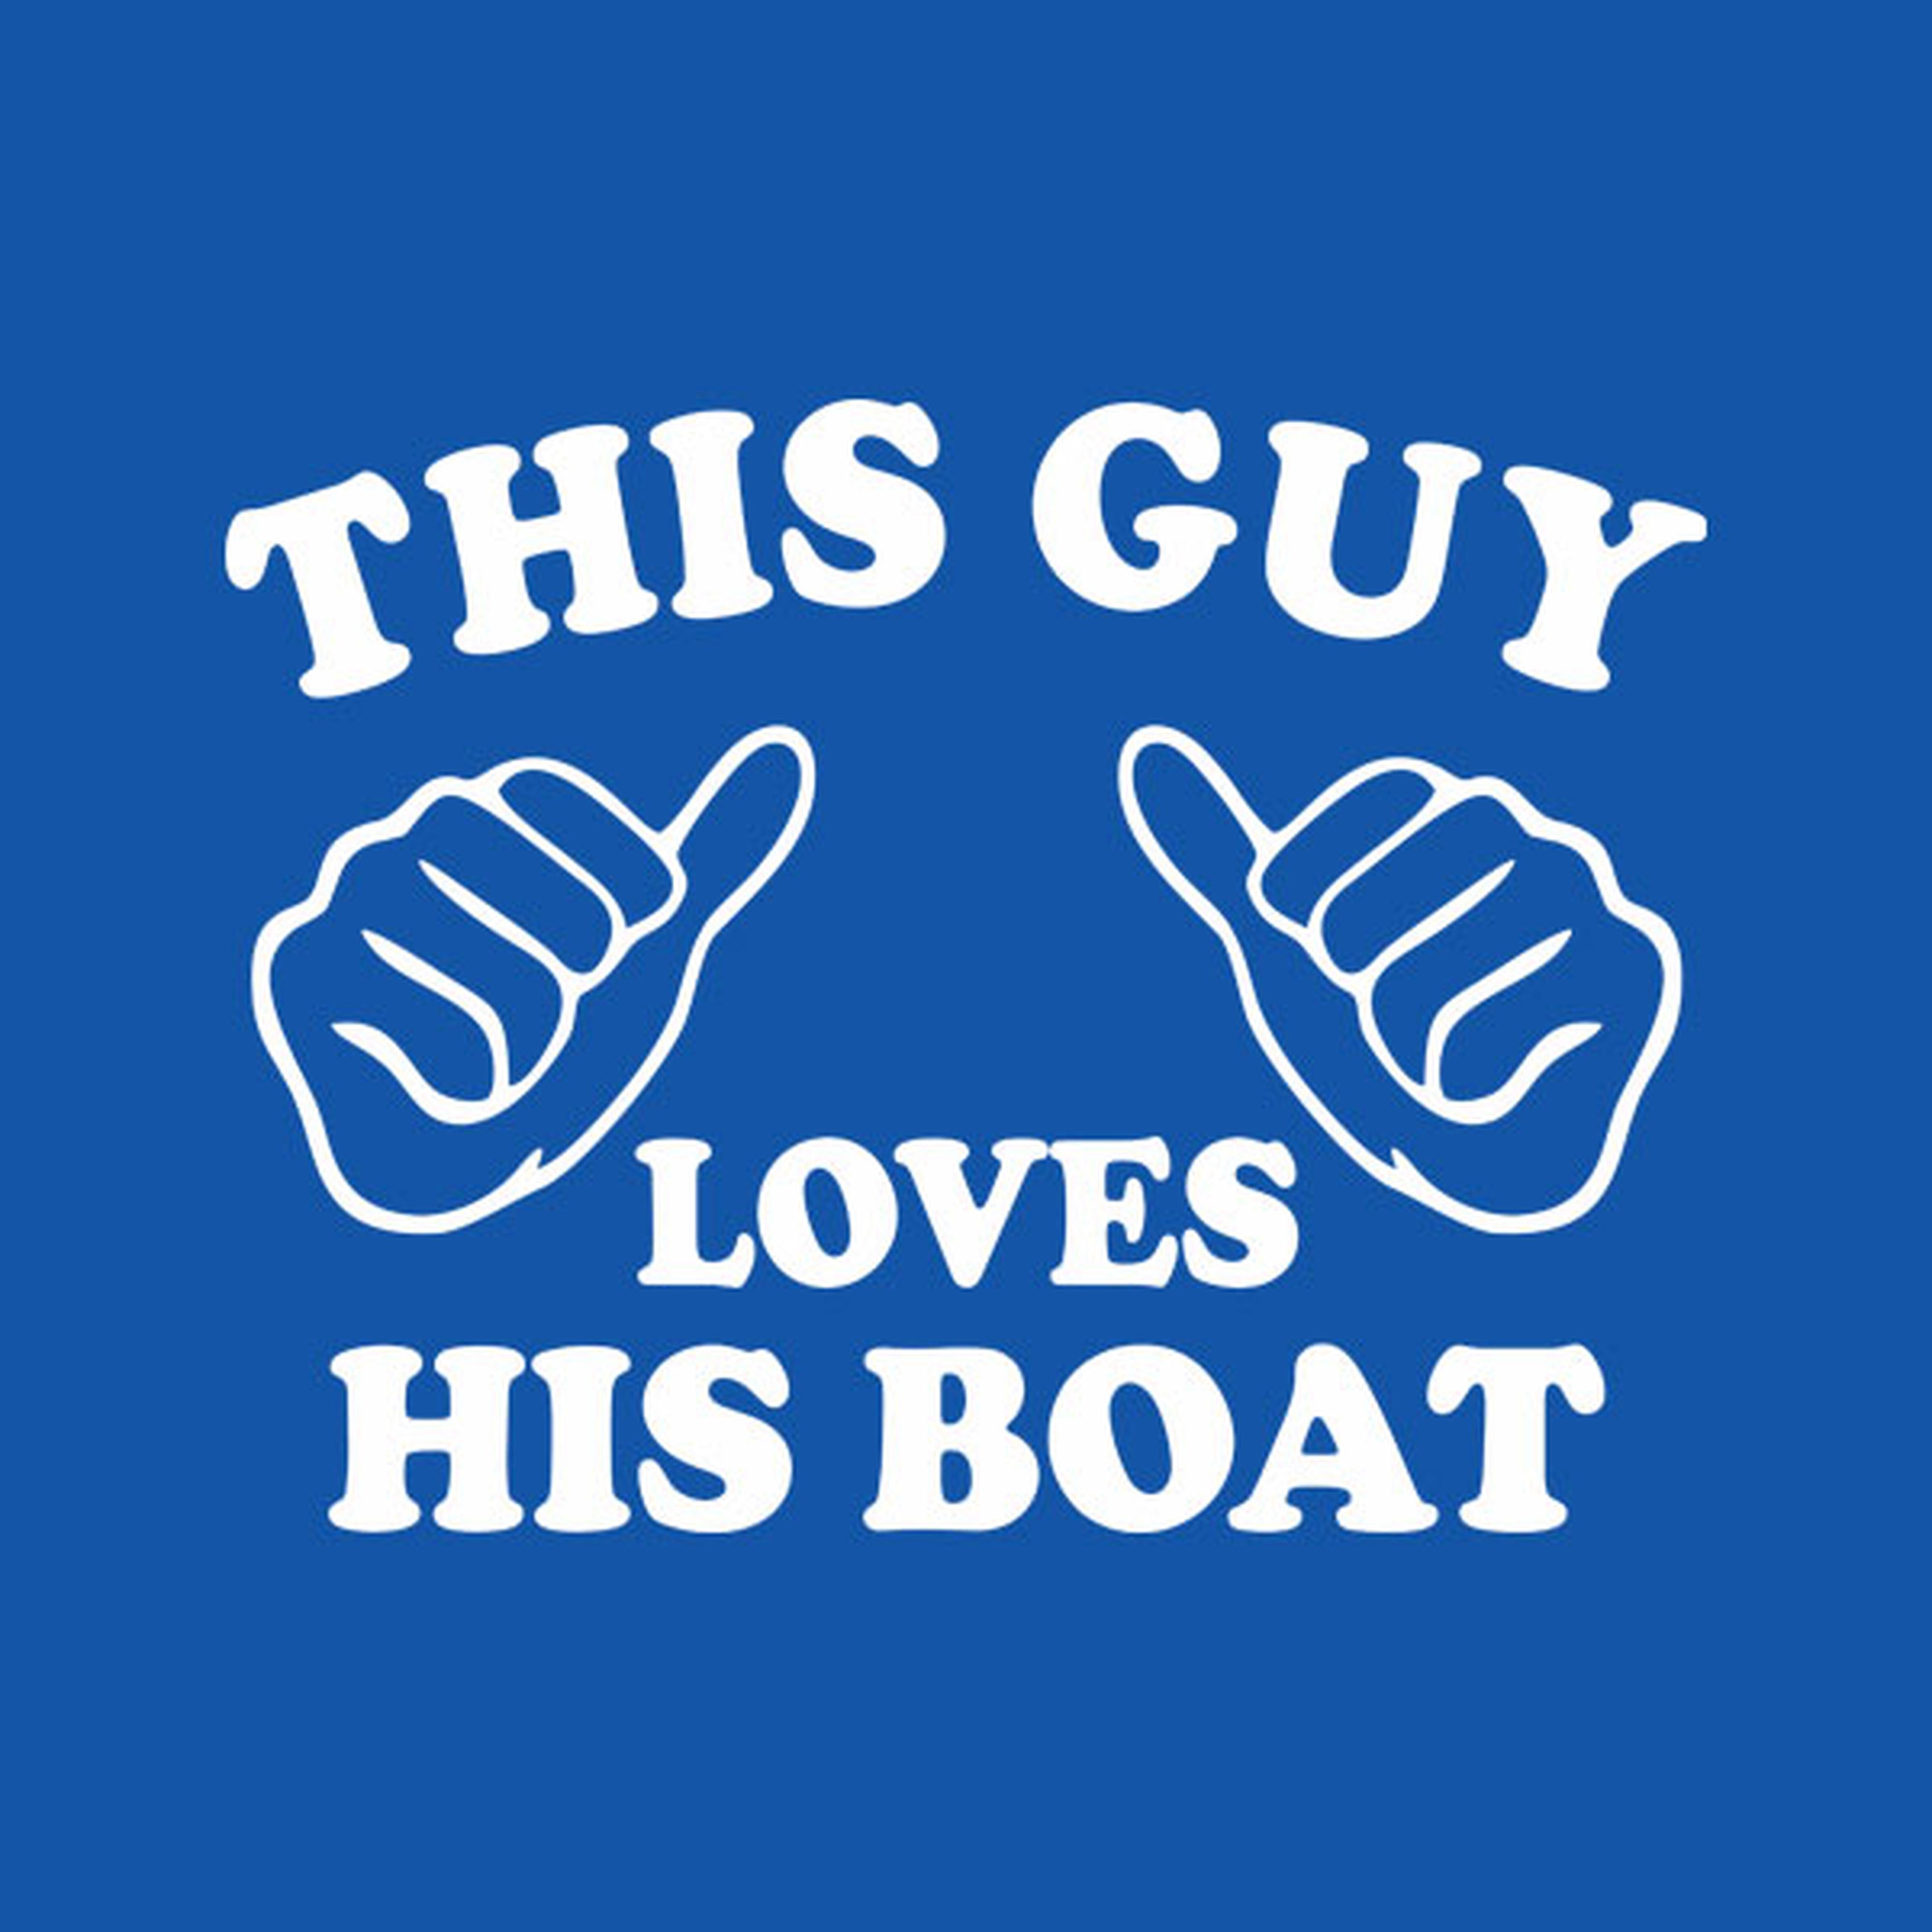 This guy loves boat - T-shirt